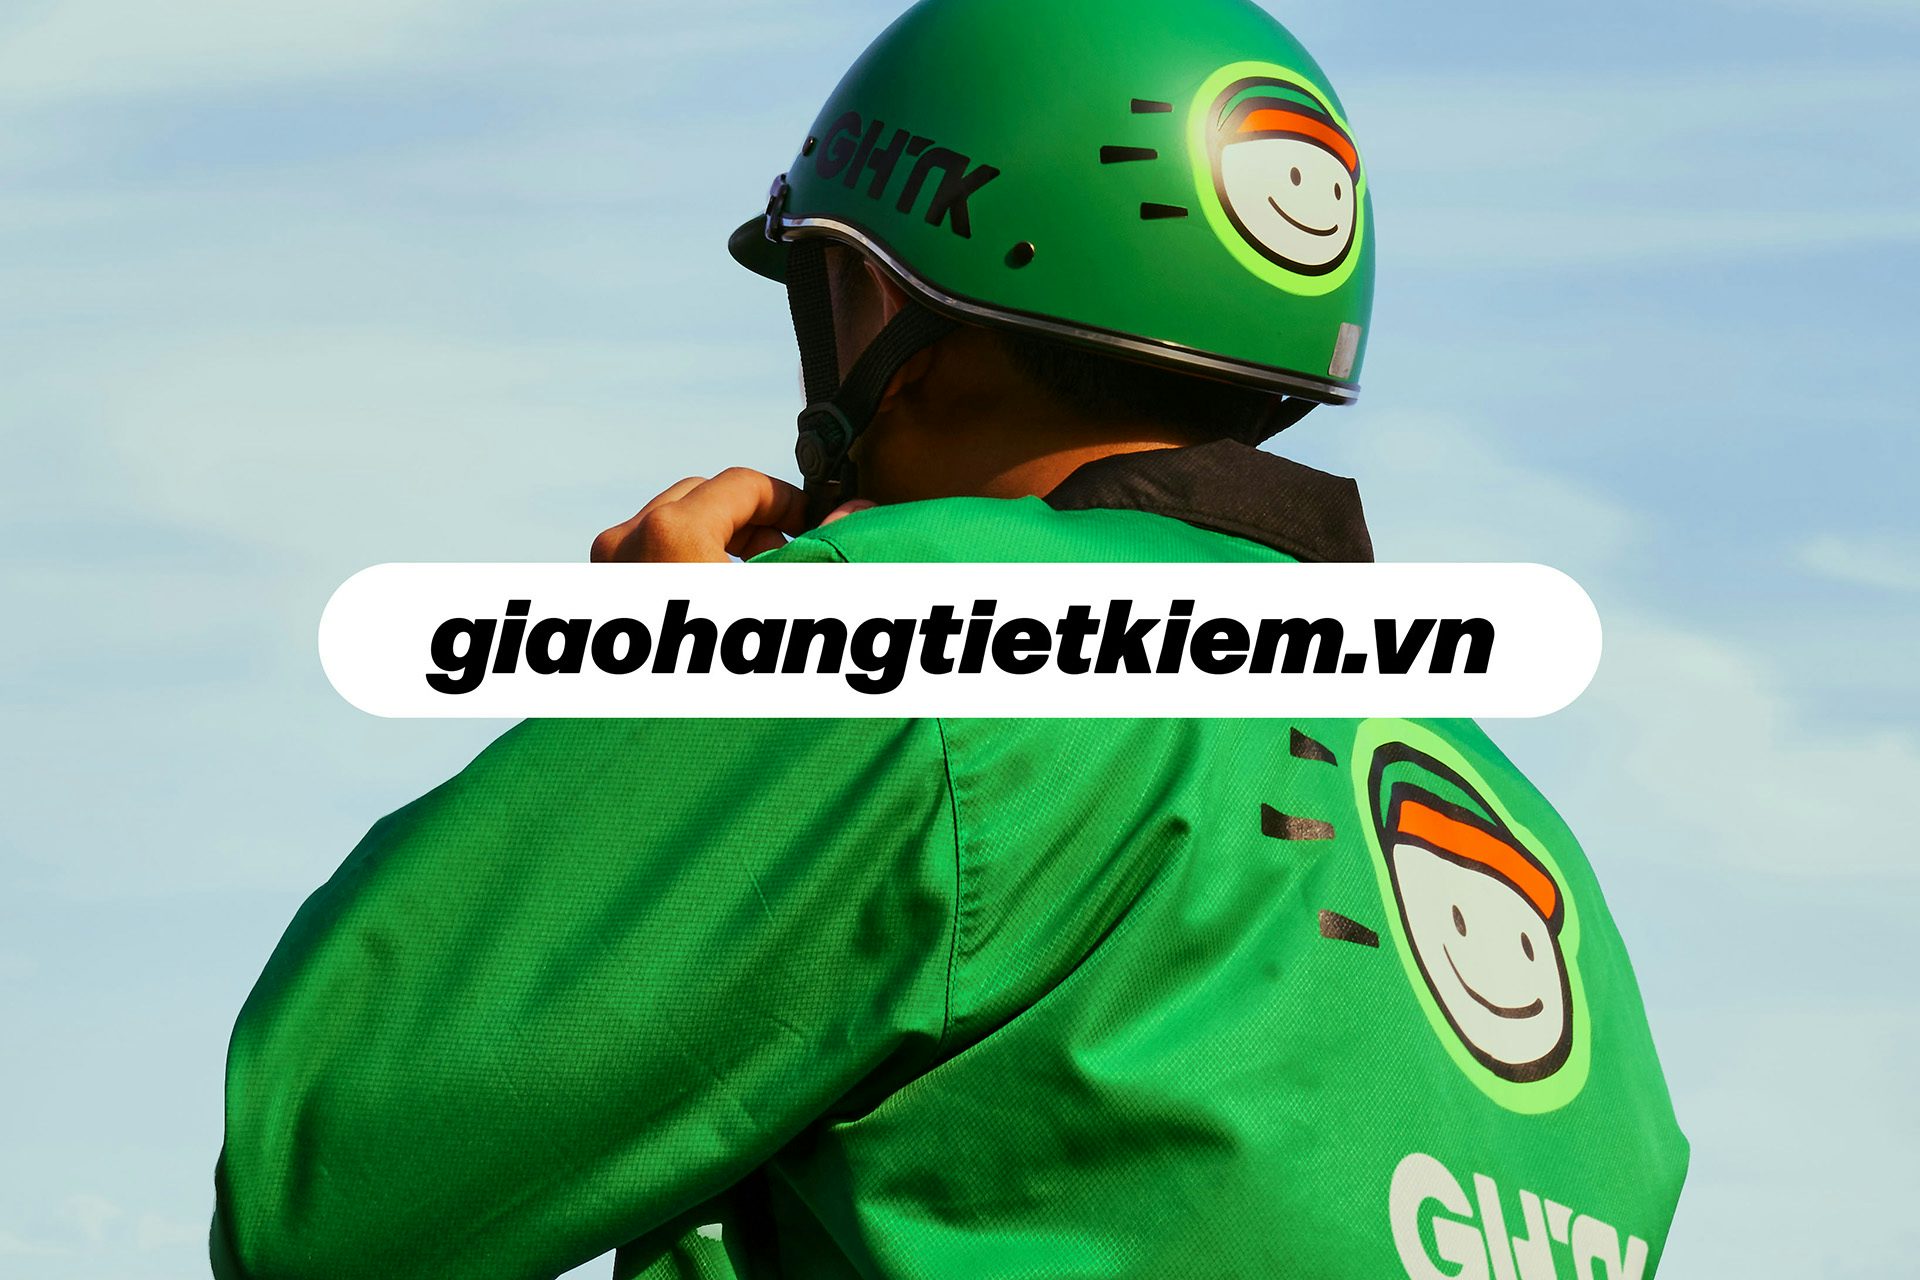 Photo of a person wearing a green jacket and a green helmet, both featuring the new GHTK mascot, a smiling cartoon face wearing a cap. The brand's website address is layered over the photo in black text with a white border